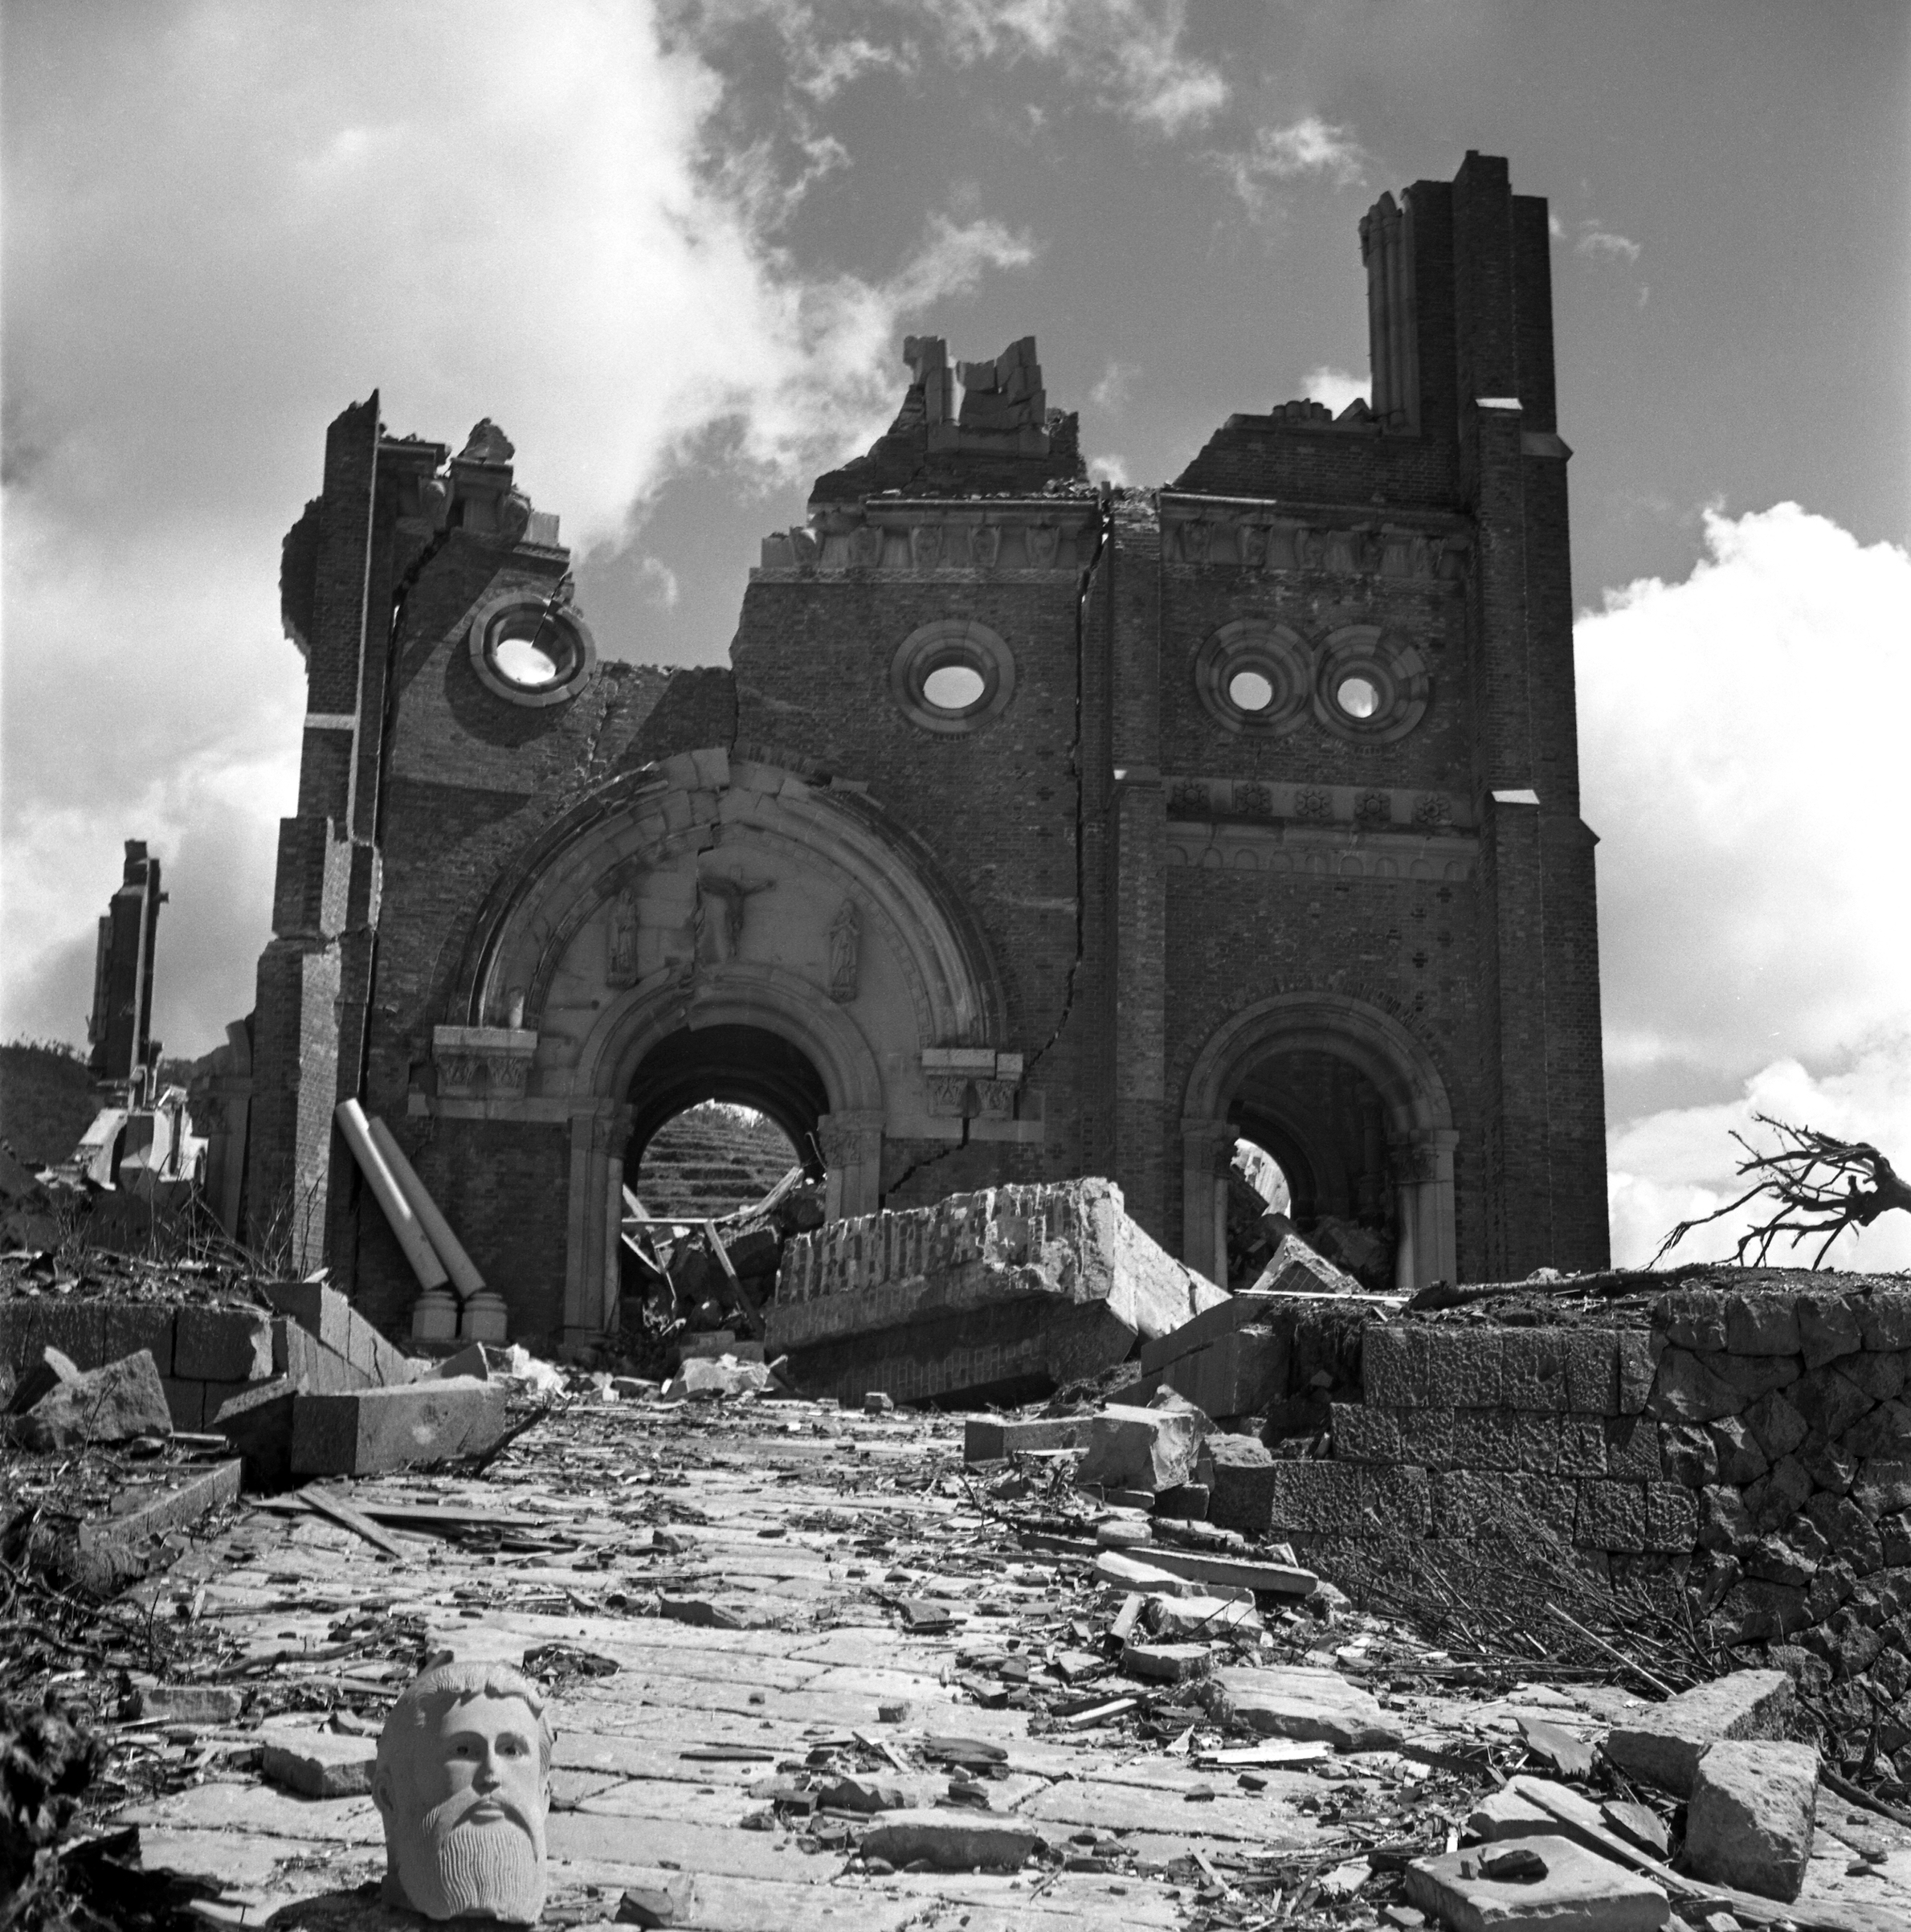 Urakami Cathedral (Roman Catholic), stands in the ruins and destruction after the atomic bomb fell on Nagasaki.